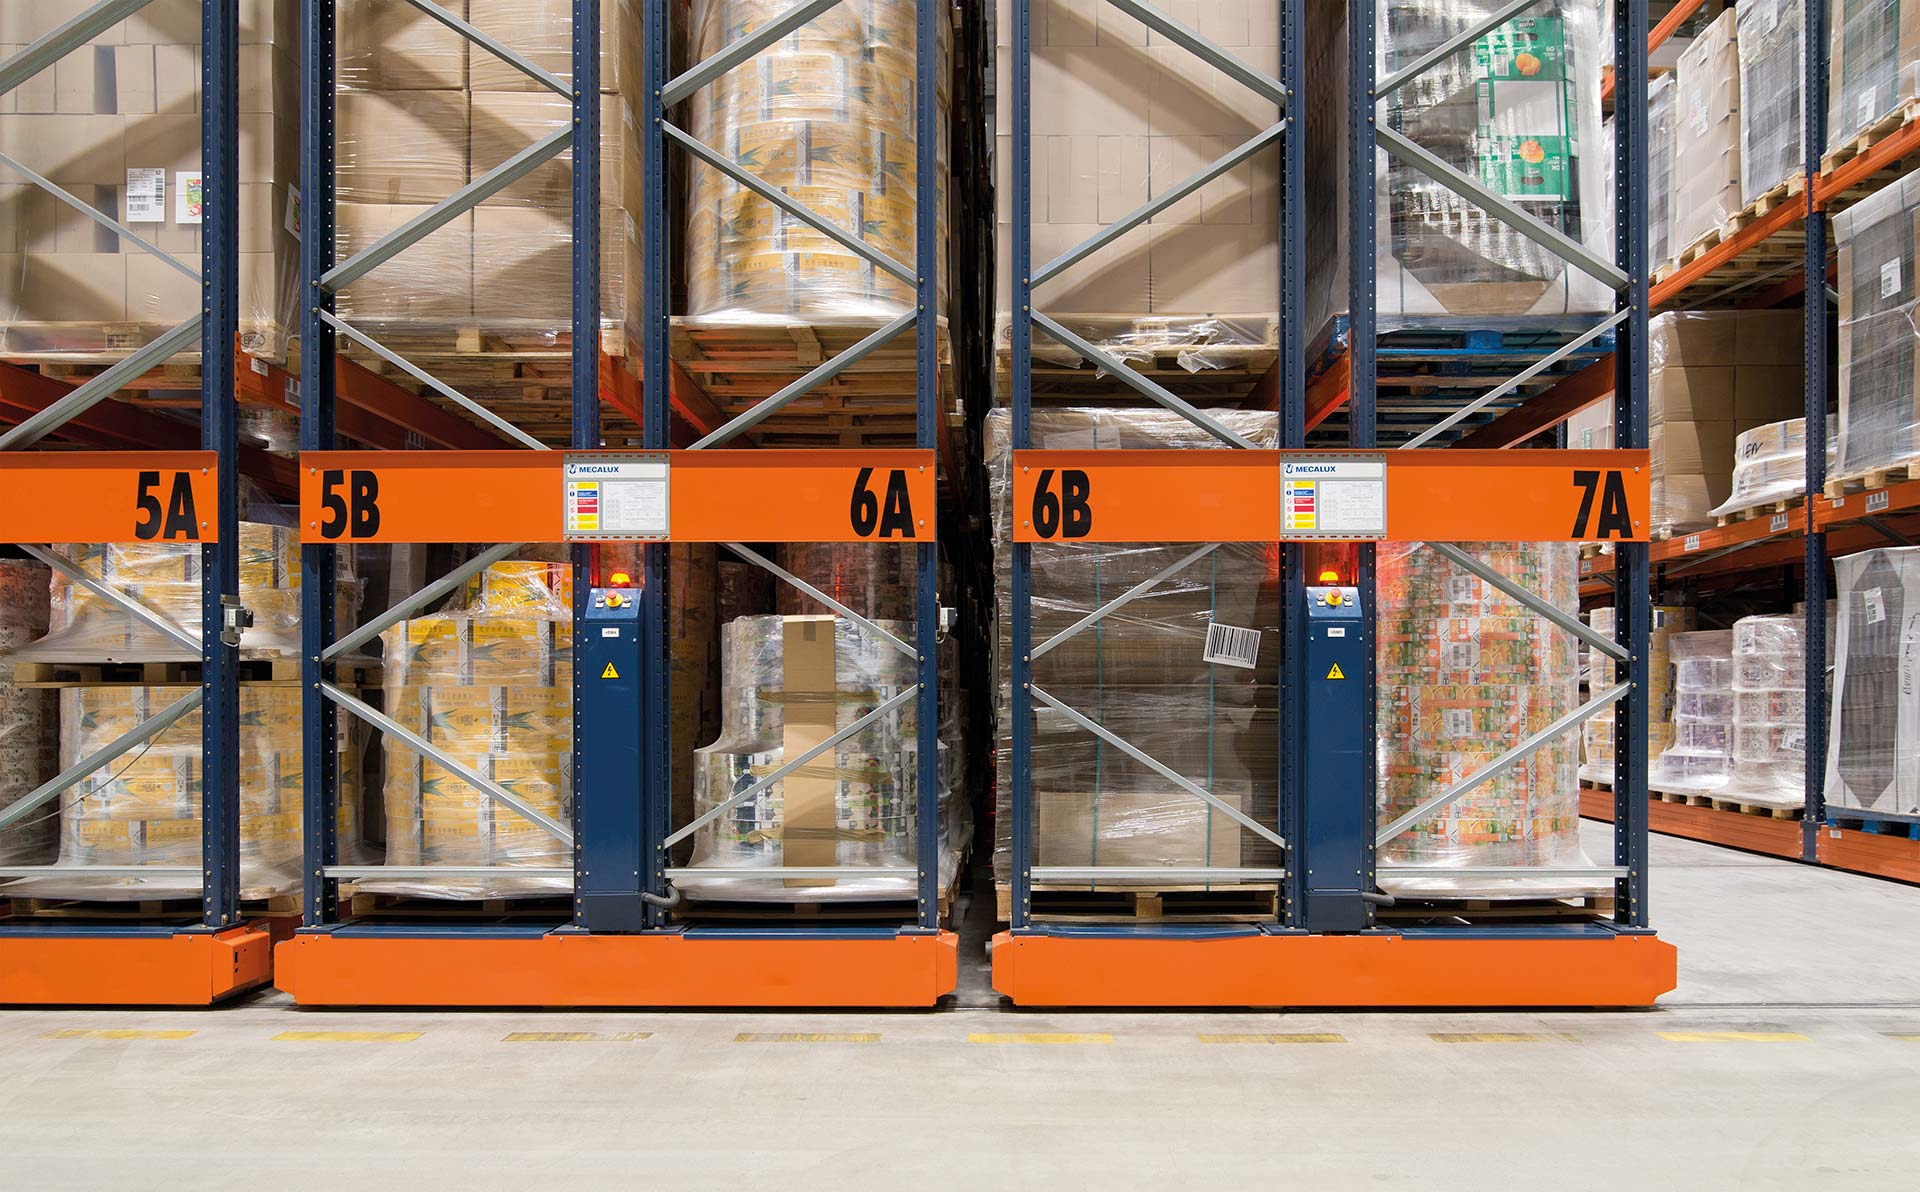 Movirack mobile pallet rack bases move the structure sideways thanks to rails set on the floor